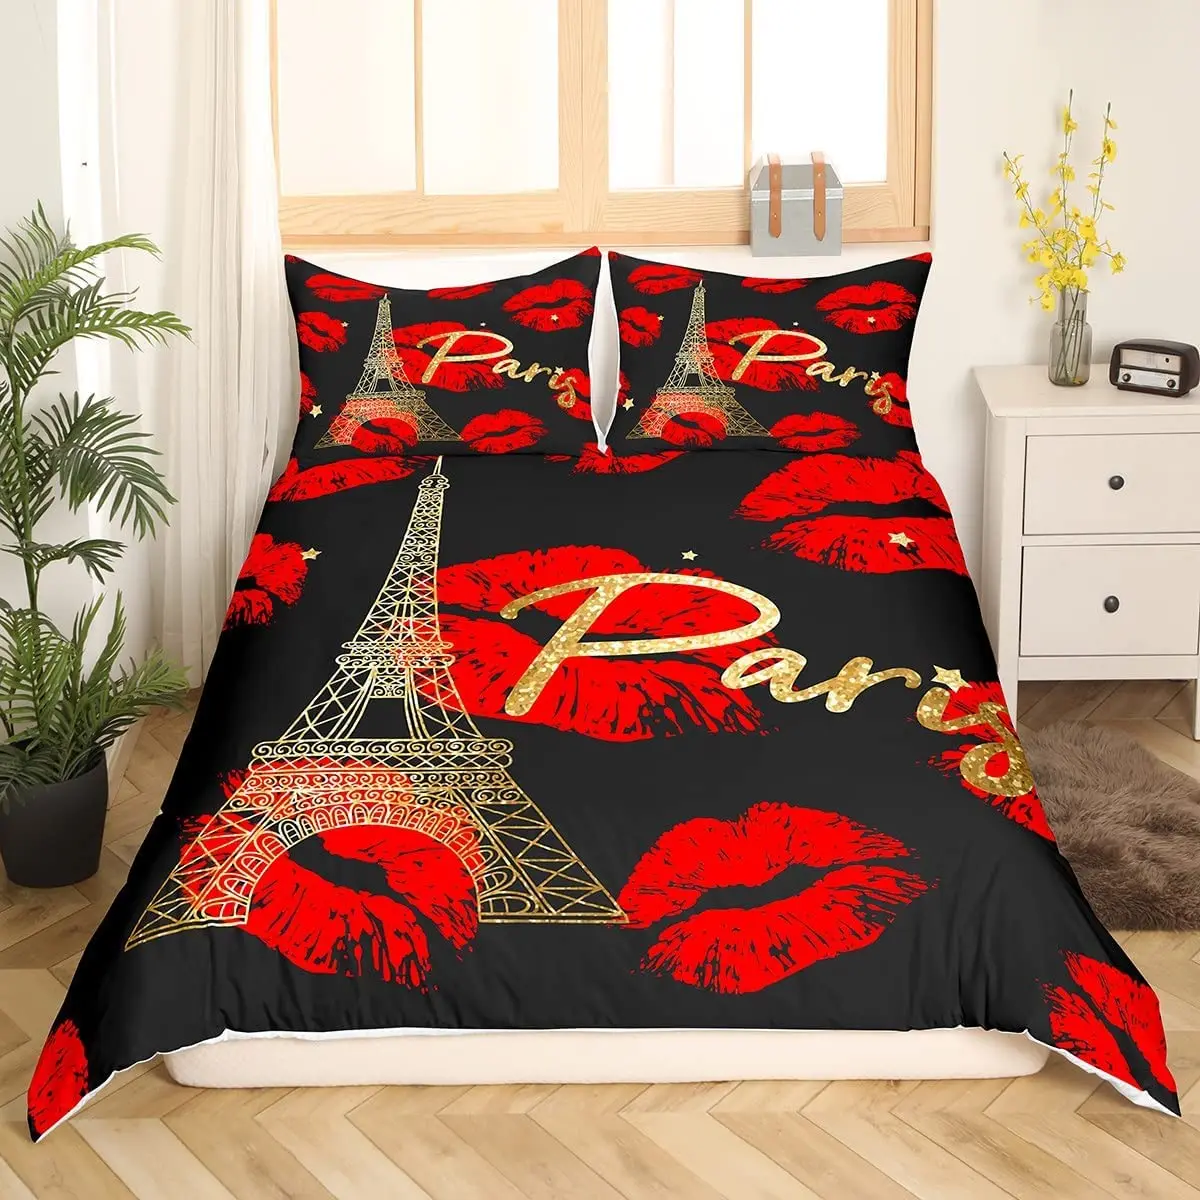 

Paris Duvet Cover Set Red Lips Kiss Marks Decor Bedding Set 3pcs for Girls Tower Soft Polyester Quilt Cover with King Size